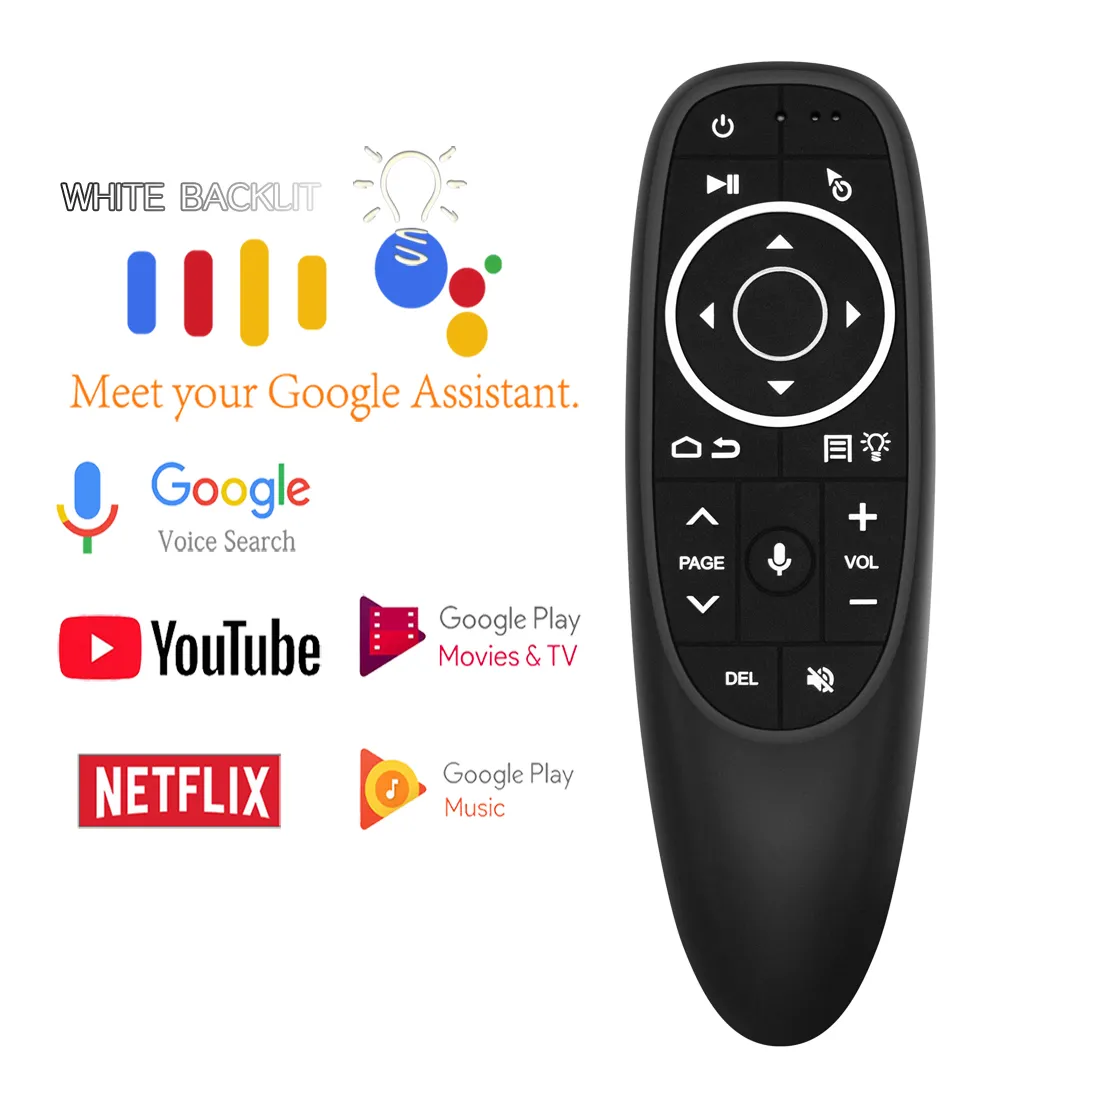 G10S PRO Voice Air Mouse Backlit 2.4GHz Wireless Google Microphone Remote Control IR Learning 6-axis Gyroscope for Android TV Box PC